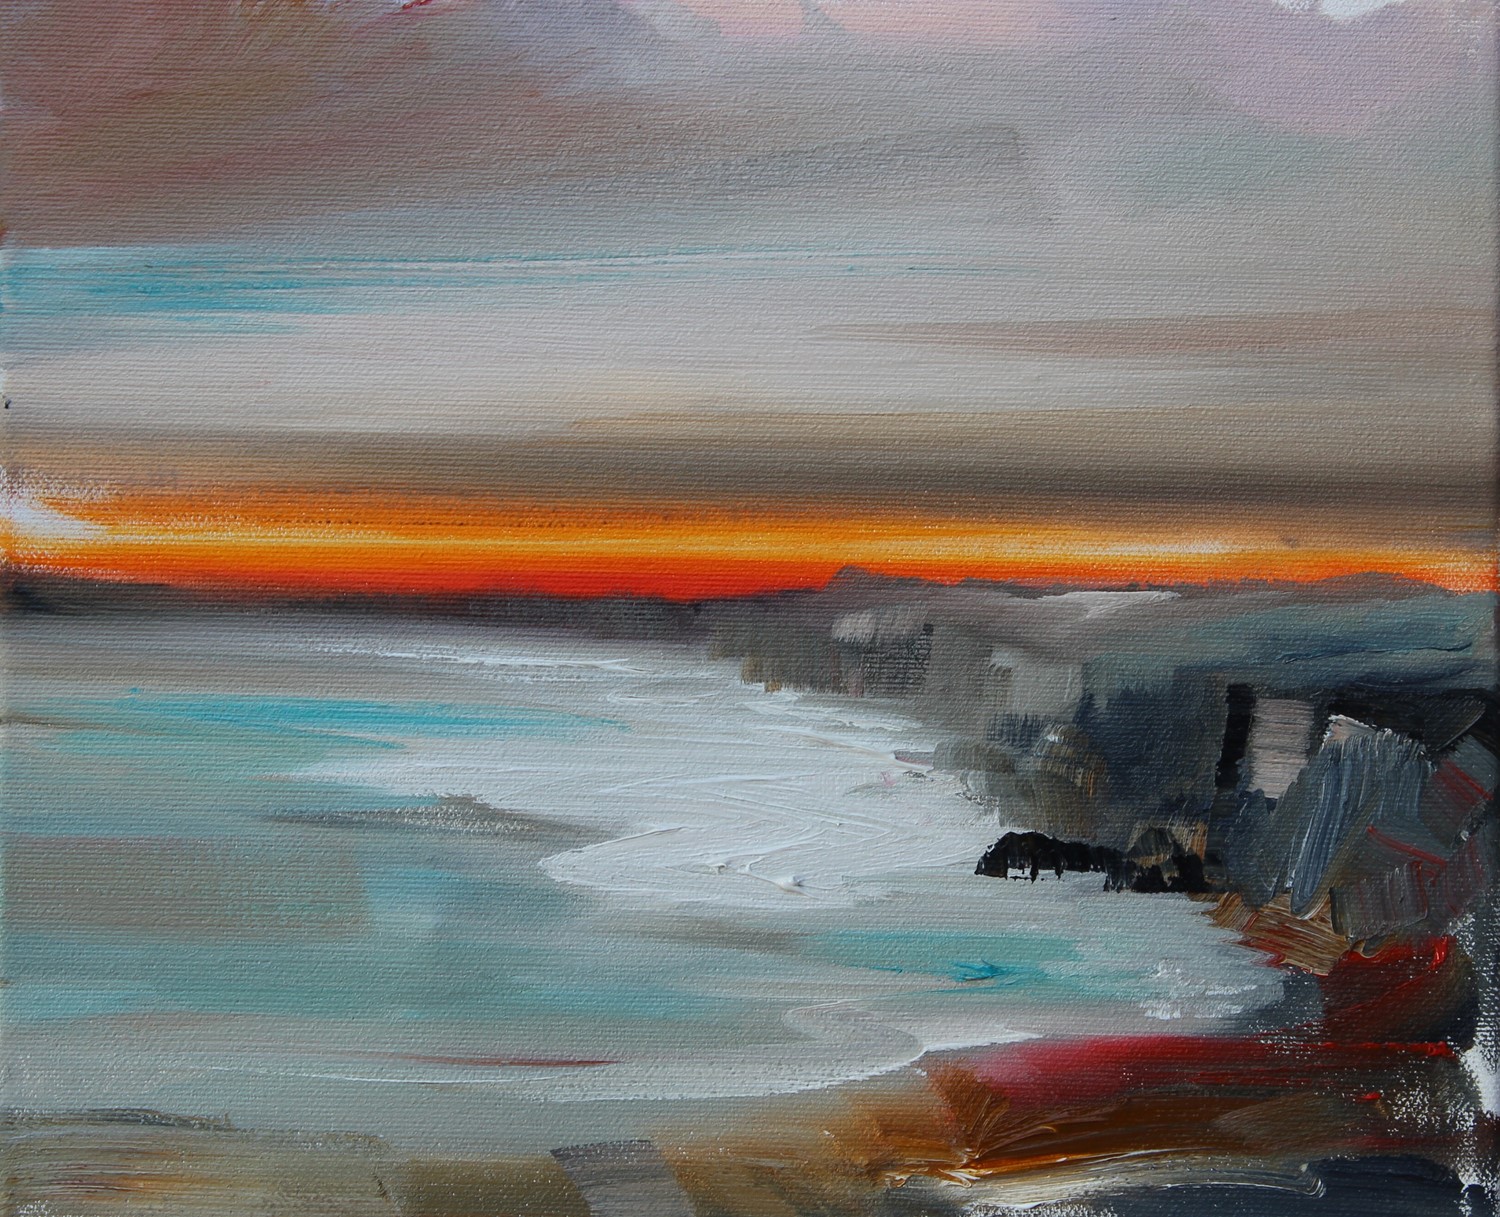 'From the Cliffs to the Shore ' by artist Rosanne Barr